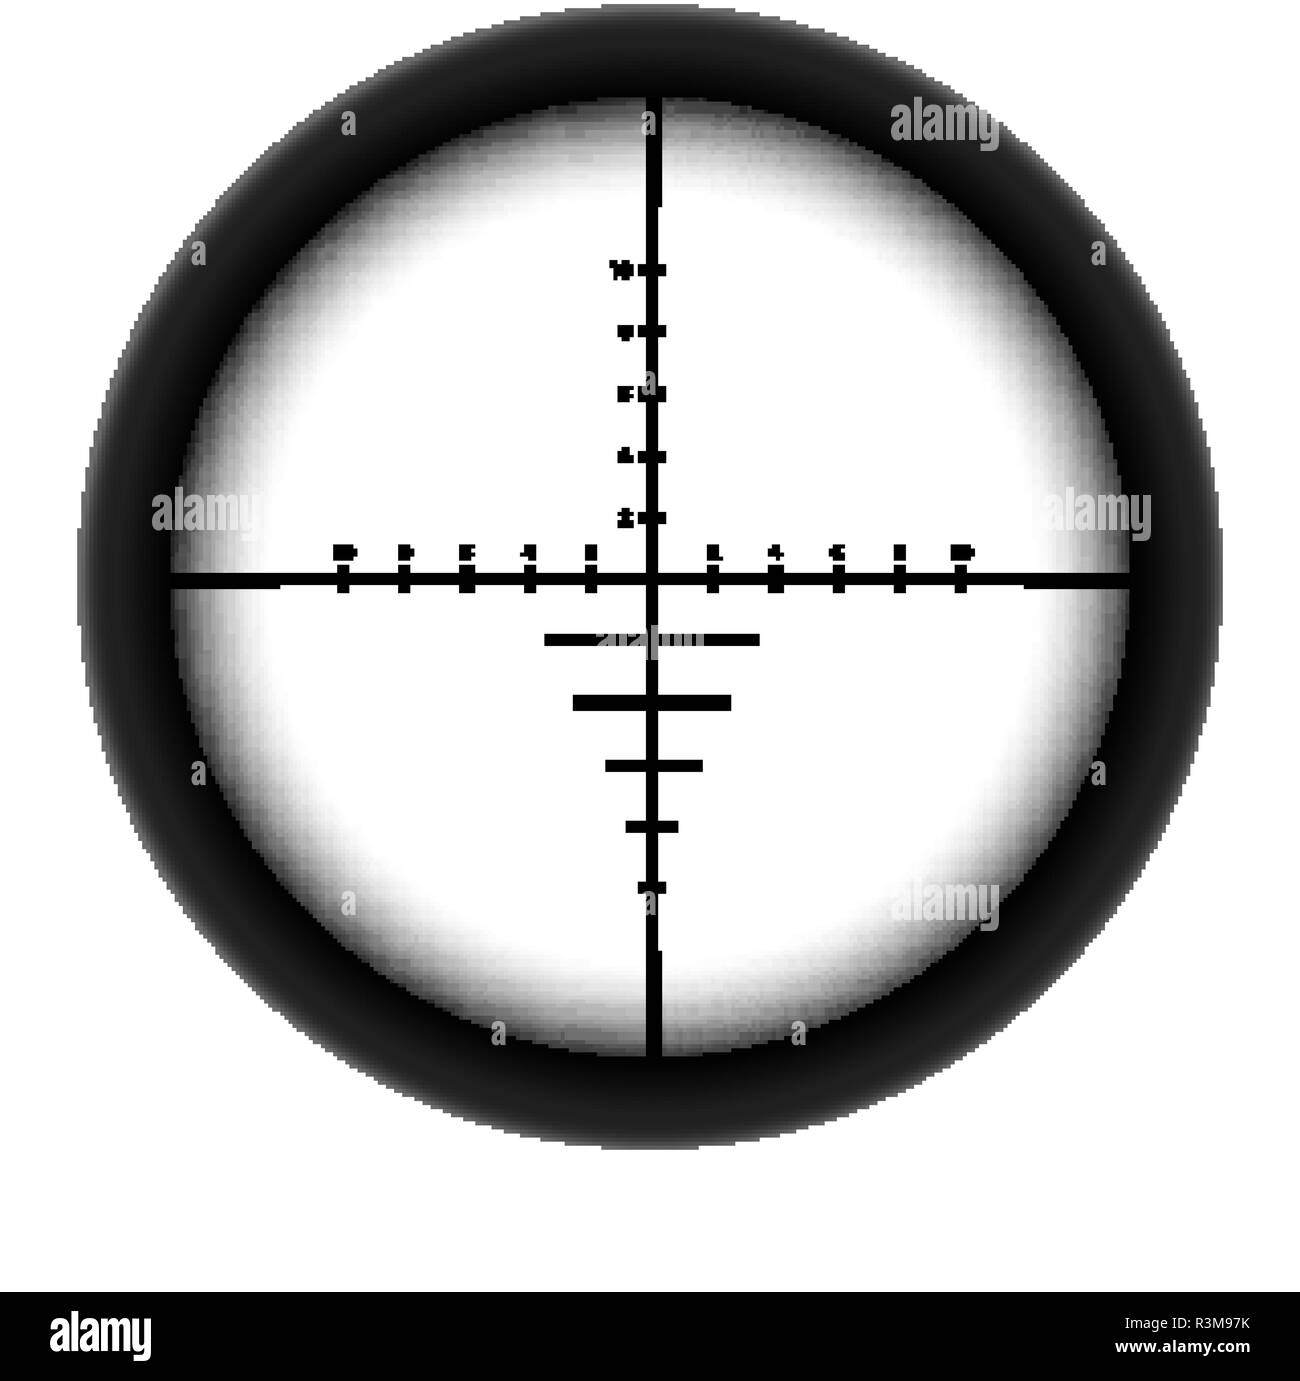 Automatic sniper collimator icon with blurred sight crosshairs Stock Vector